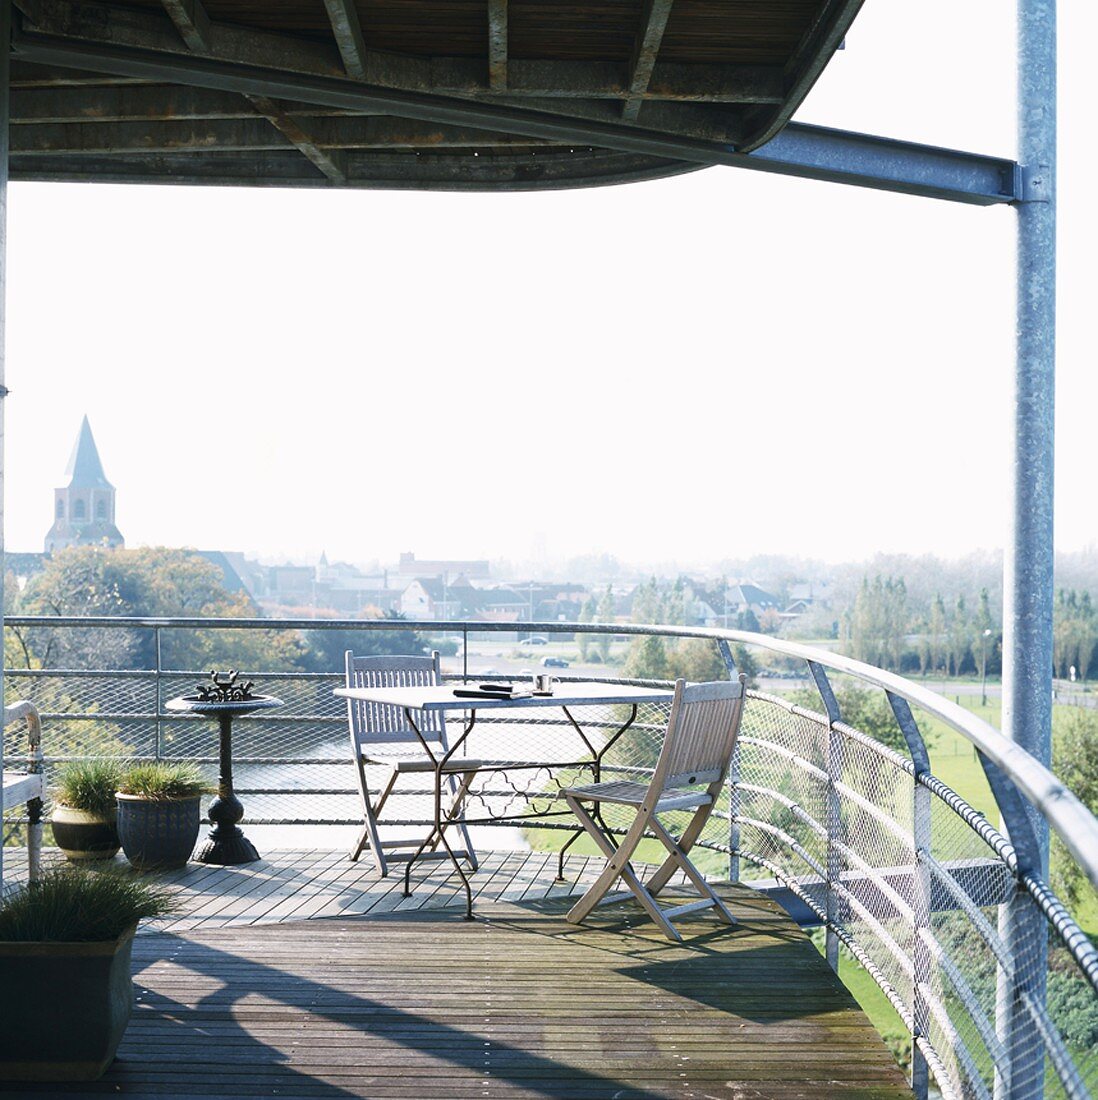 Modern, furnished terrace made from galvanised joists with wooden floor and view of river and cityscape